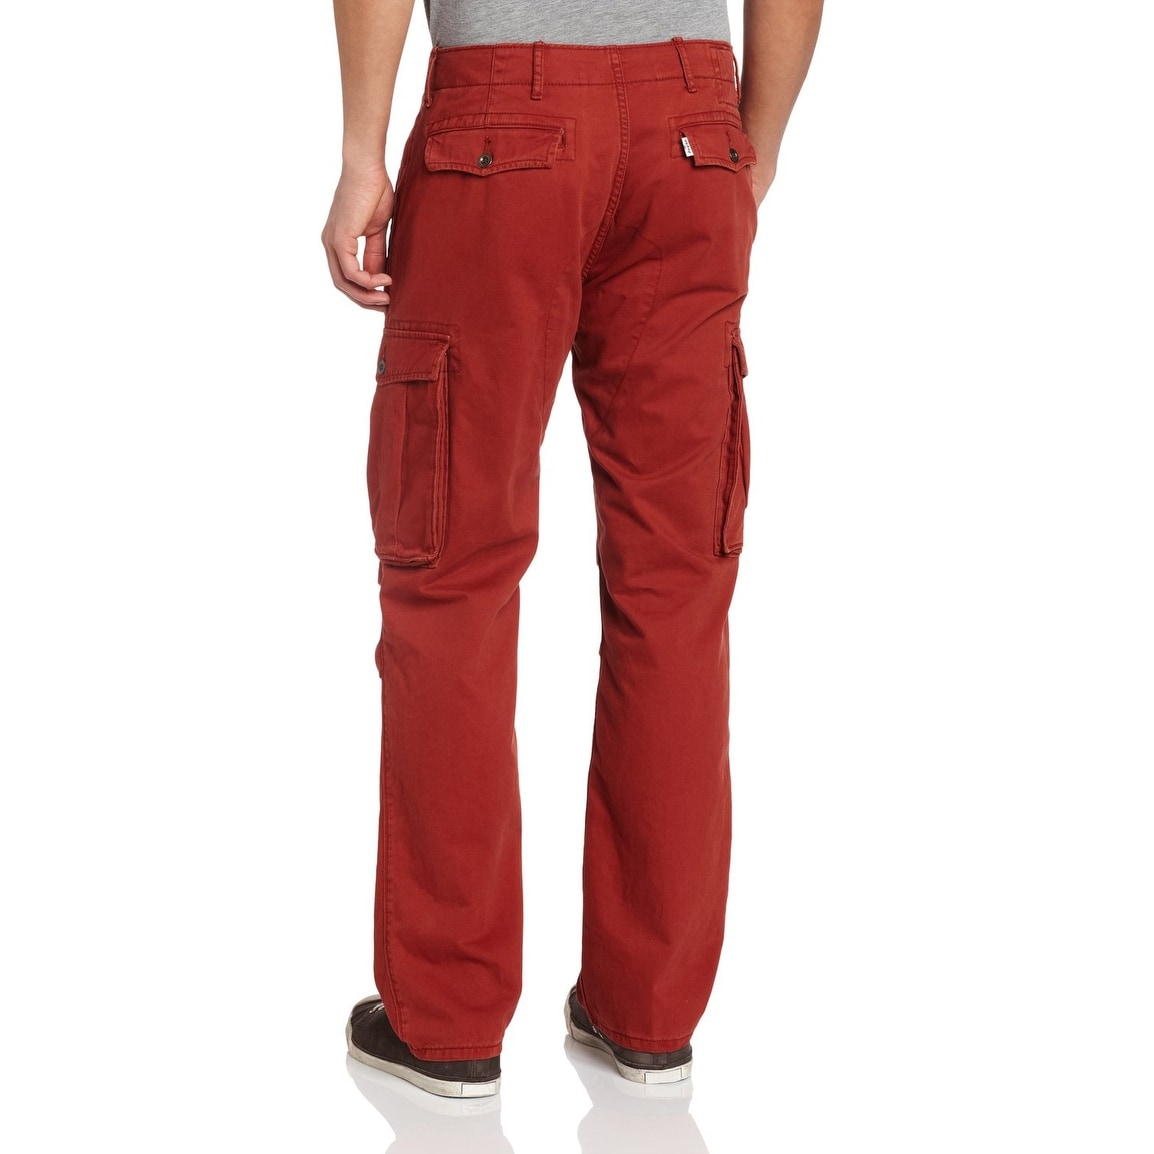 red cargo pants mens